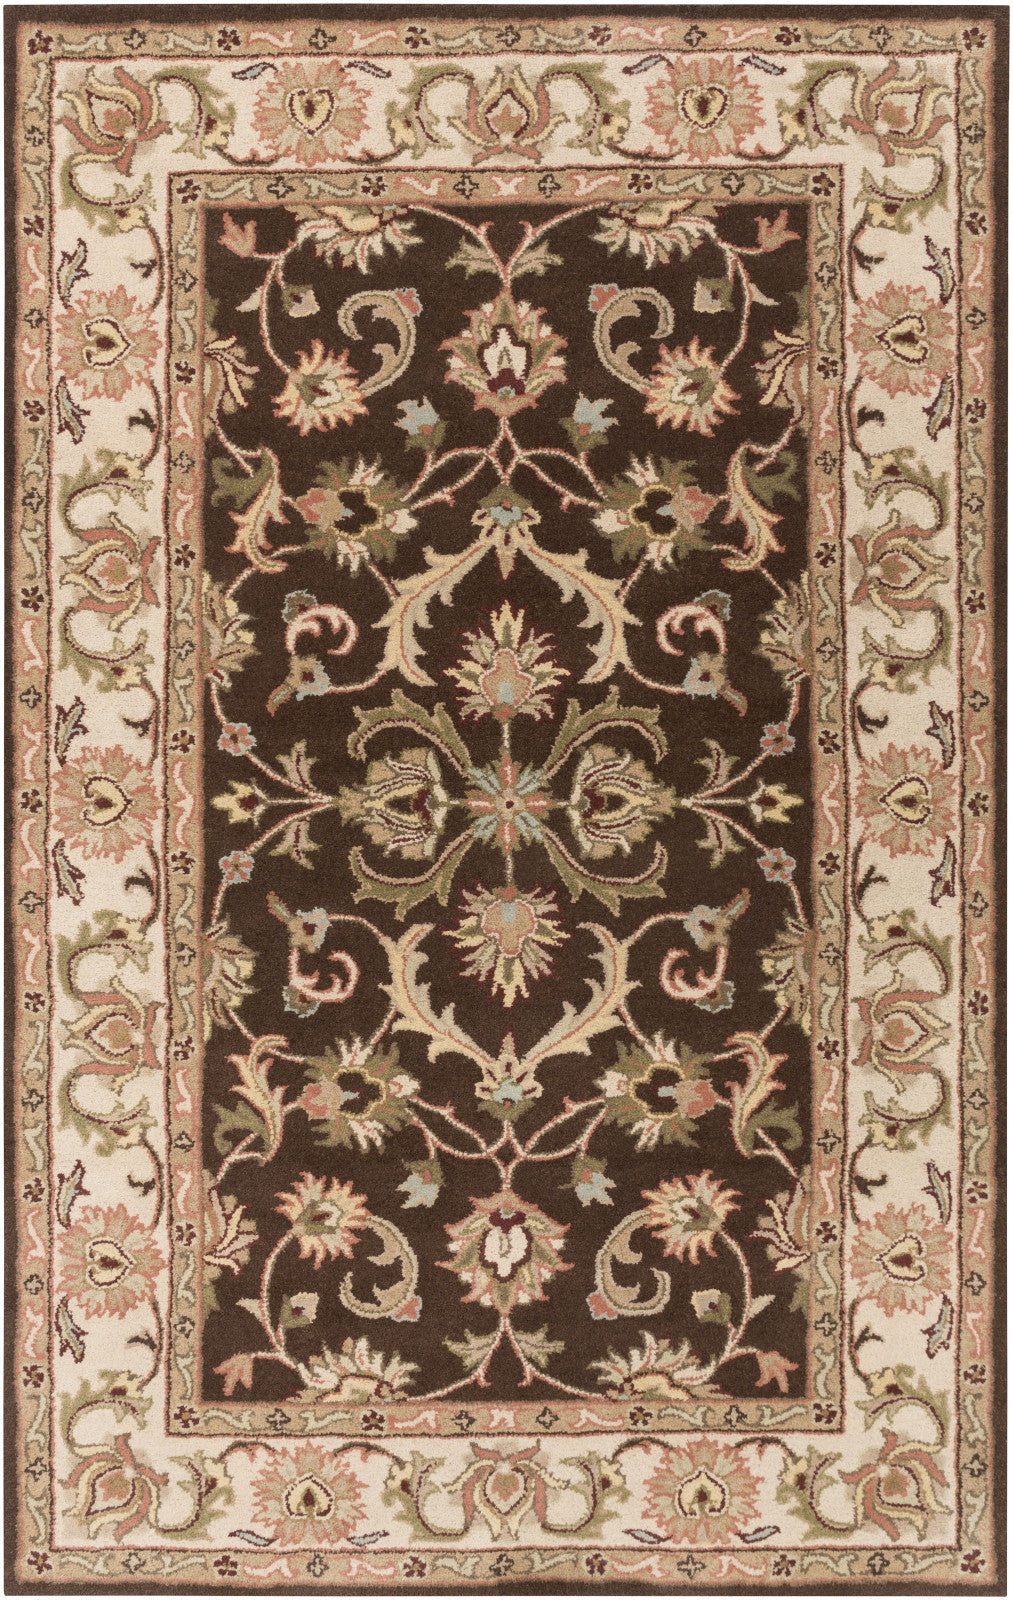 Artistic Weavers Oxford Aria Chocolate Brown/Olive Green Area Rug main image